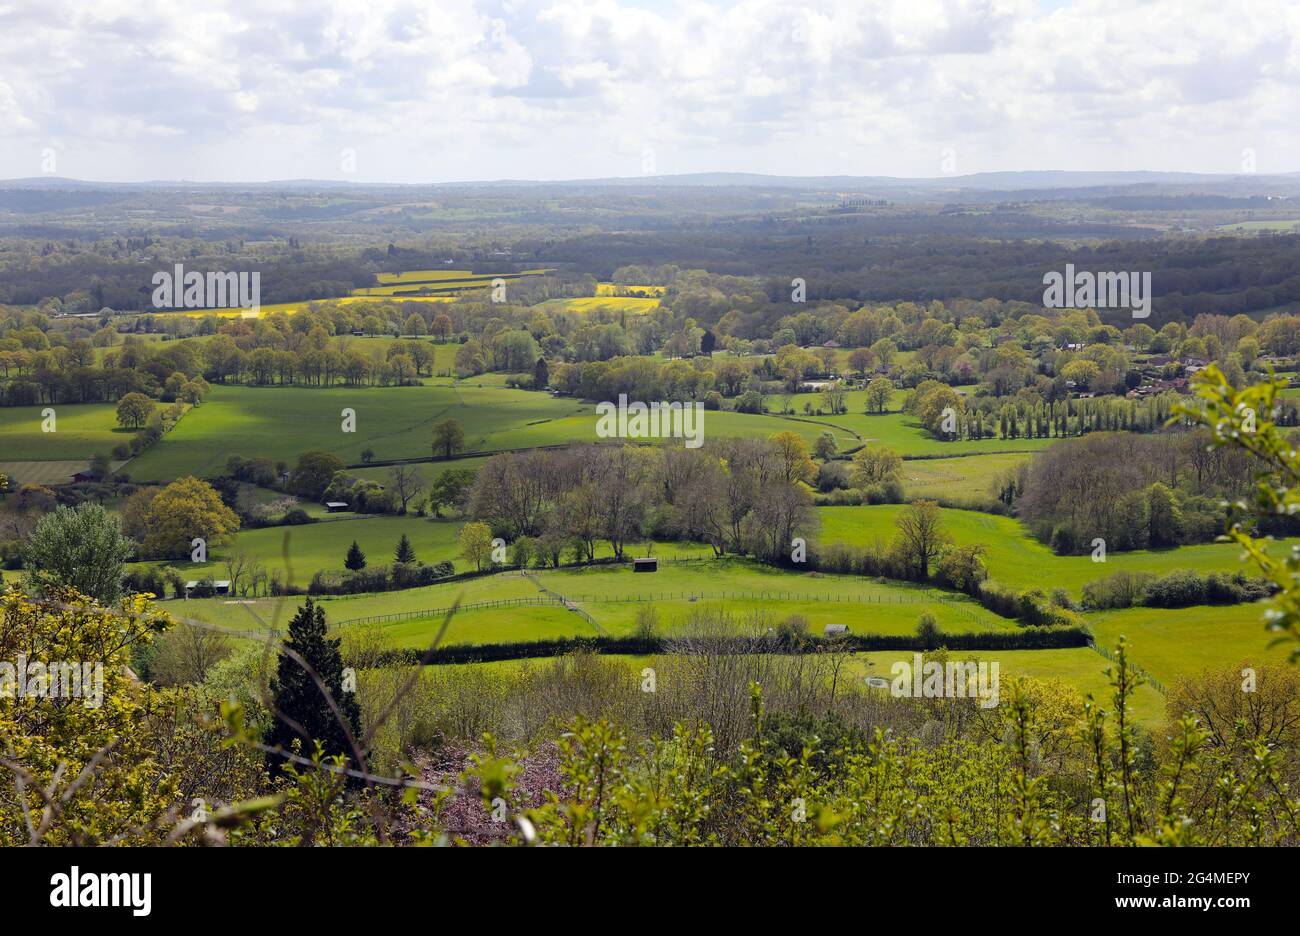 The view from One Tree Hill woodland, nr Sevenoaks,  looking south across the Weald of Kent, England. Stock Photo